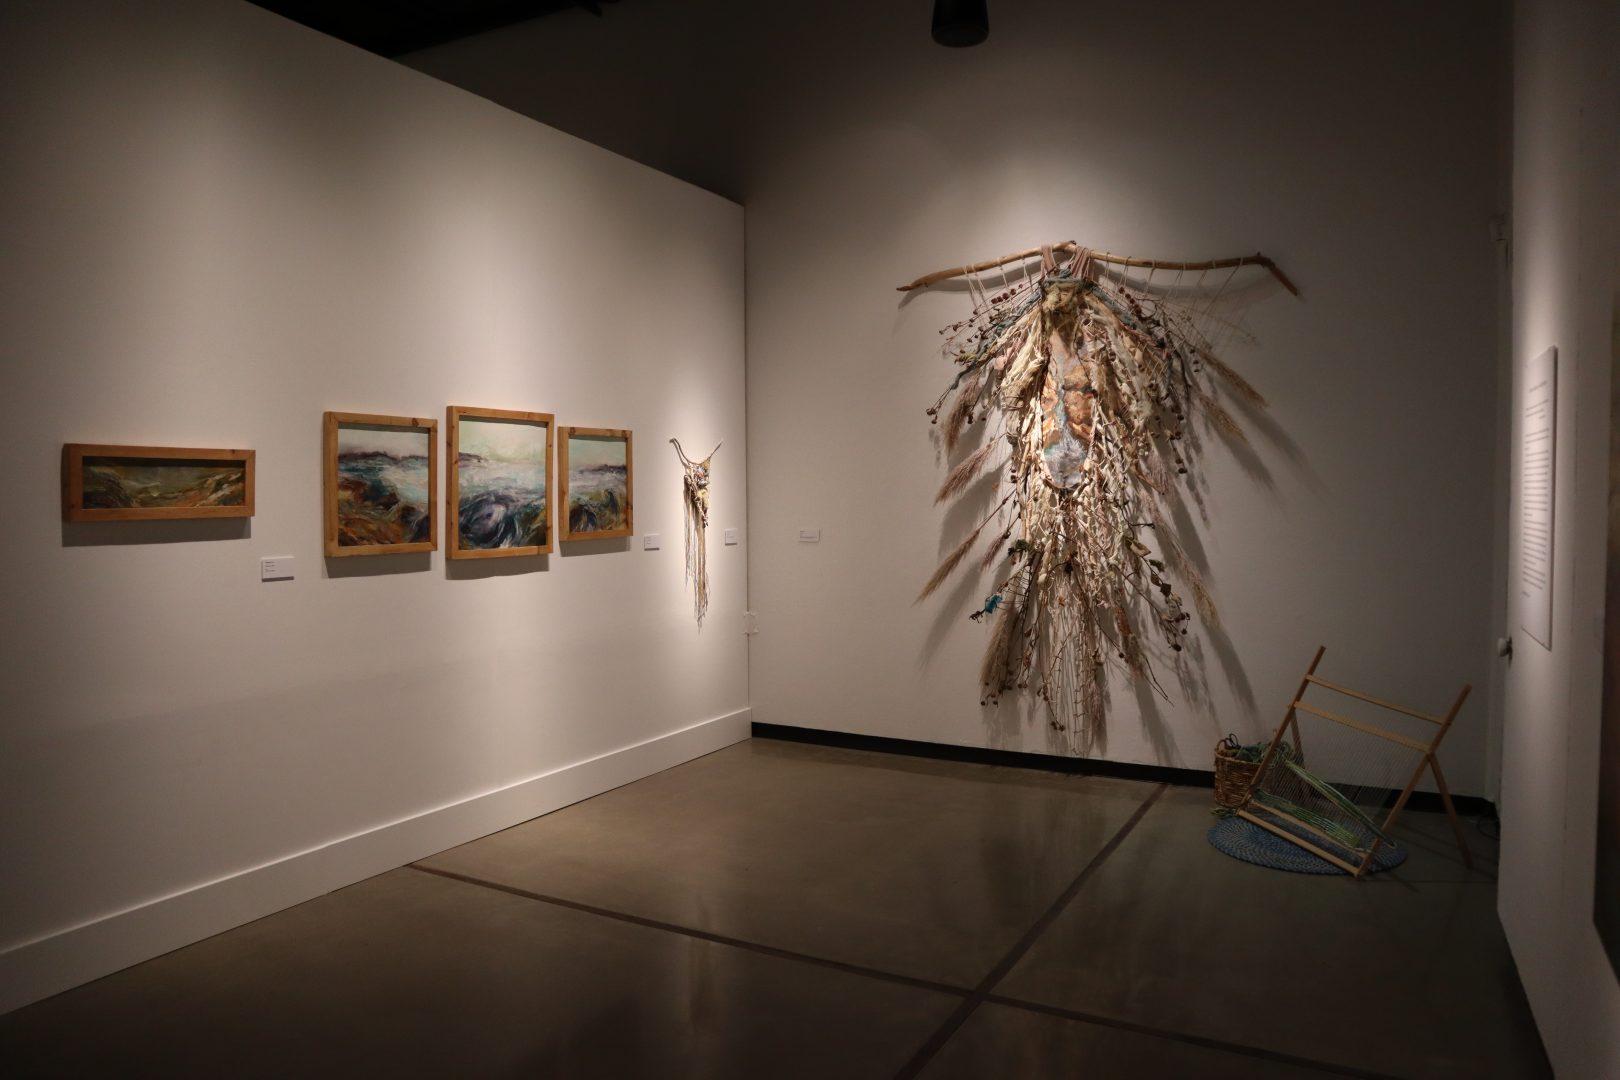 Gabrielle+Marie+Luos+exhibit+features+acrylic+landscapes+weaved+together+with+driftwood%2C+seaweed+and+other+plant+materials.+%28Kameron+Thorn%2FThe+Collegian%29